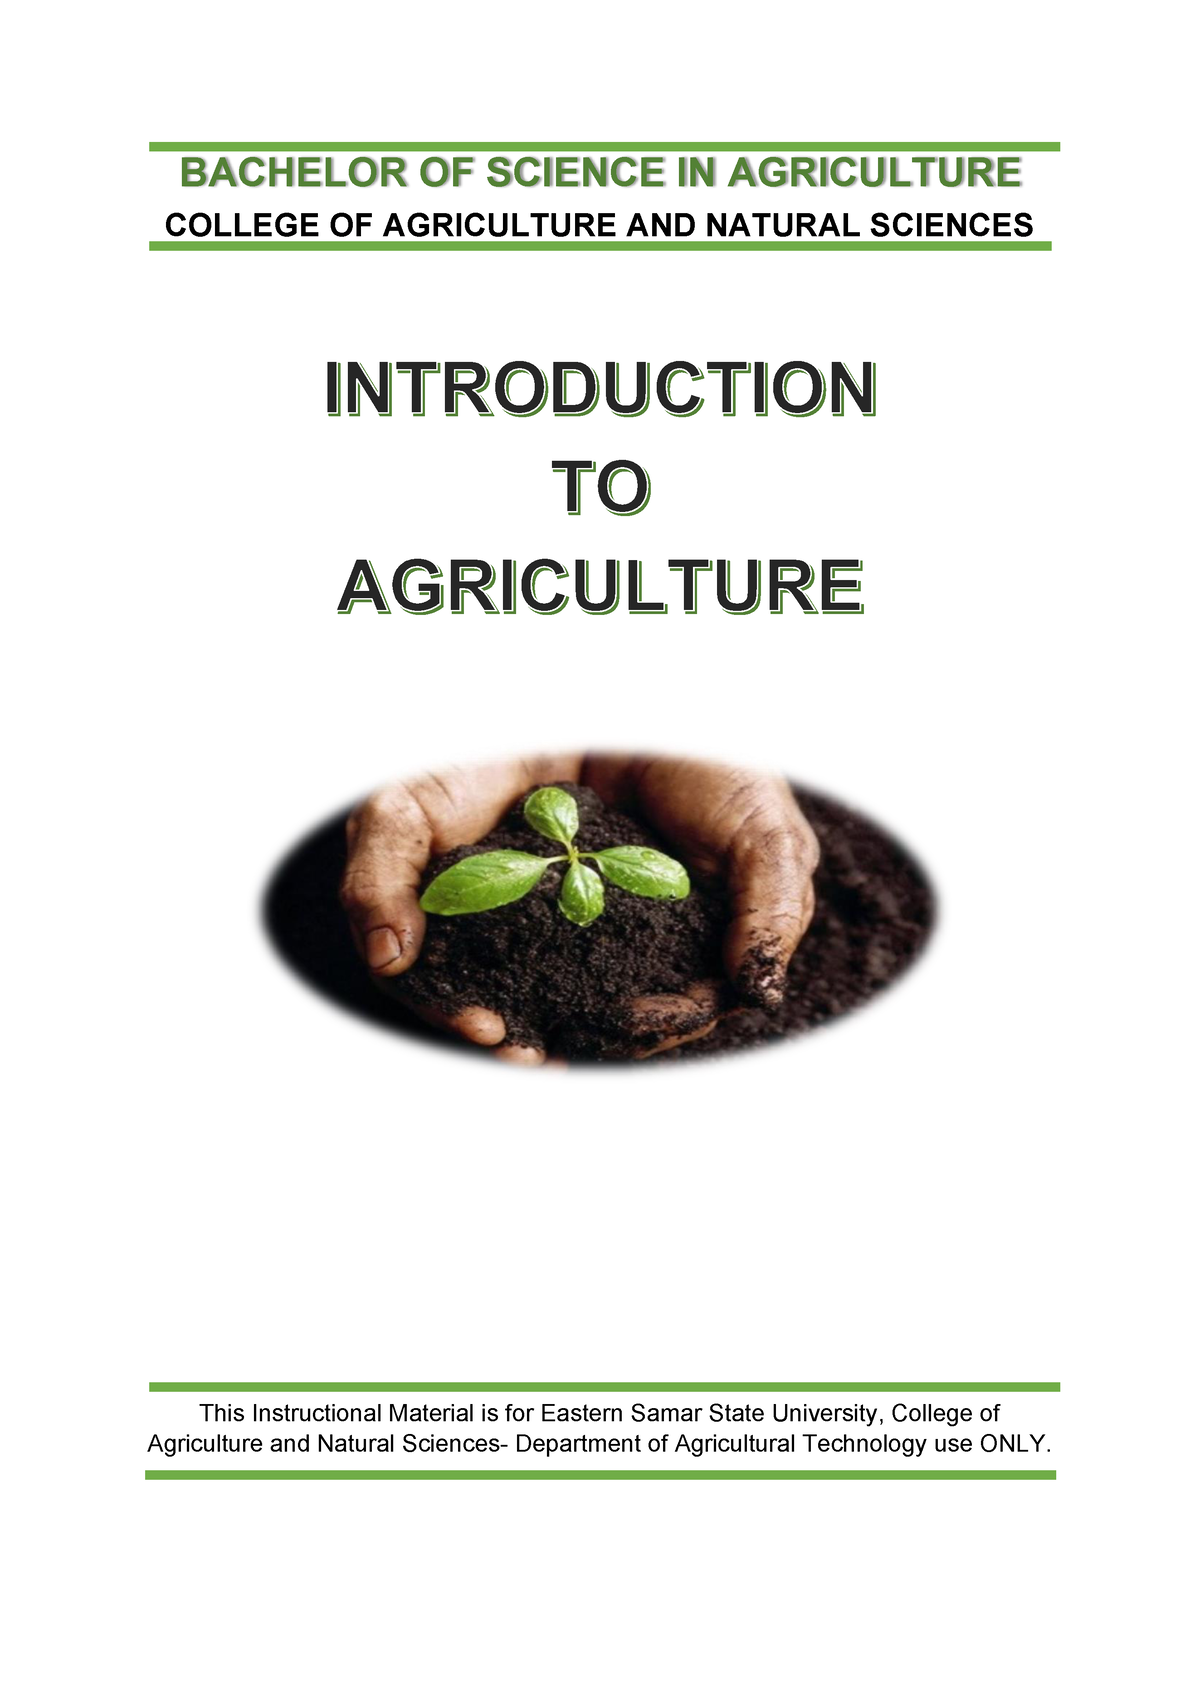 introduction to agriculture essay